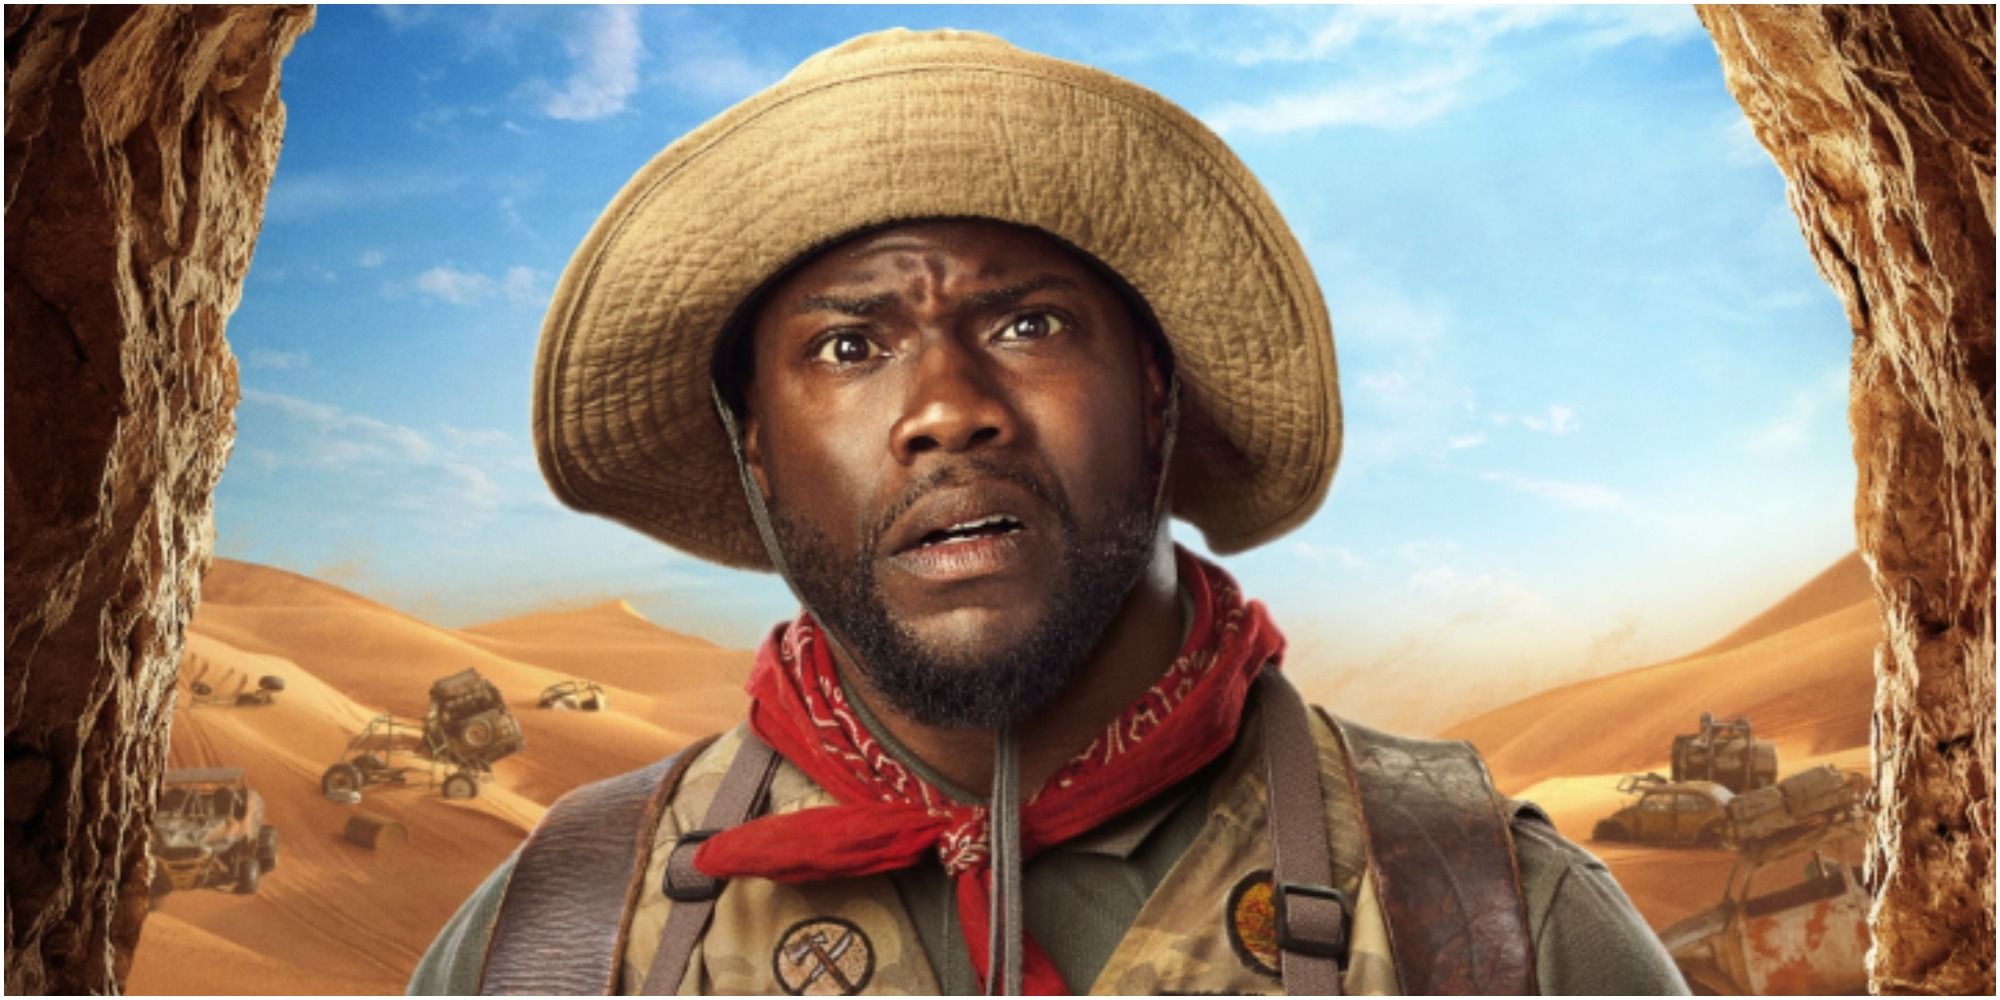 kevin hart marcus makes a movie